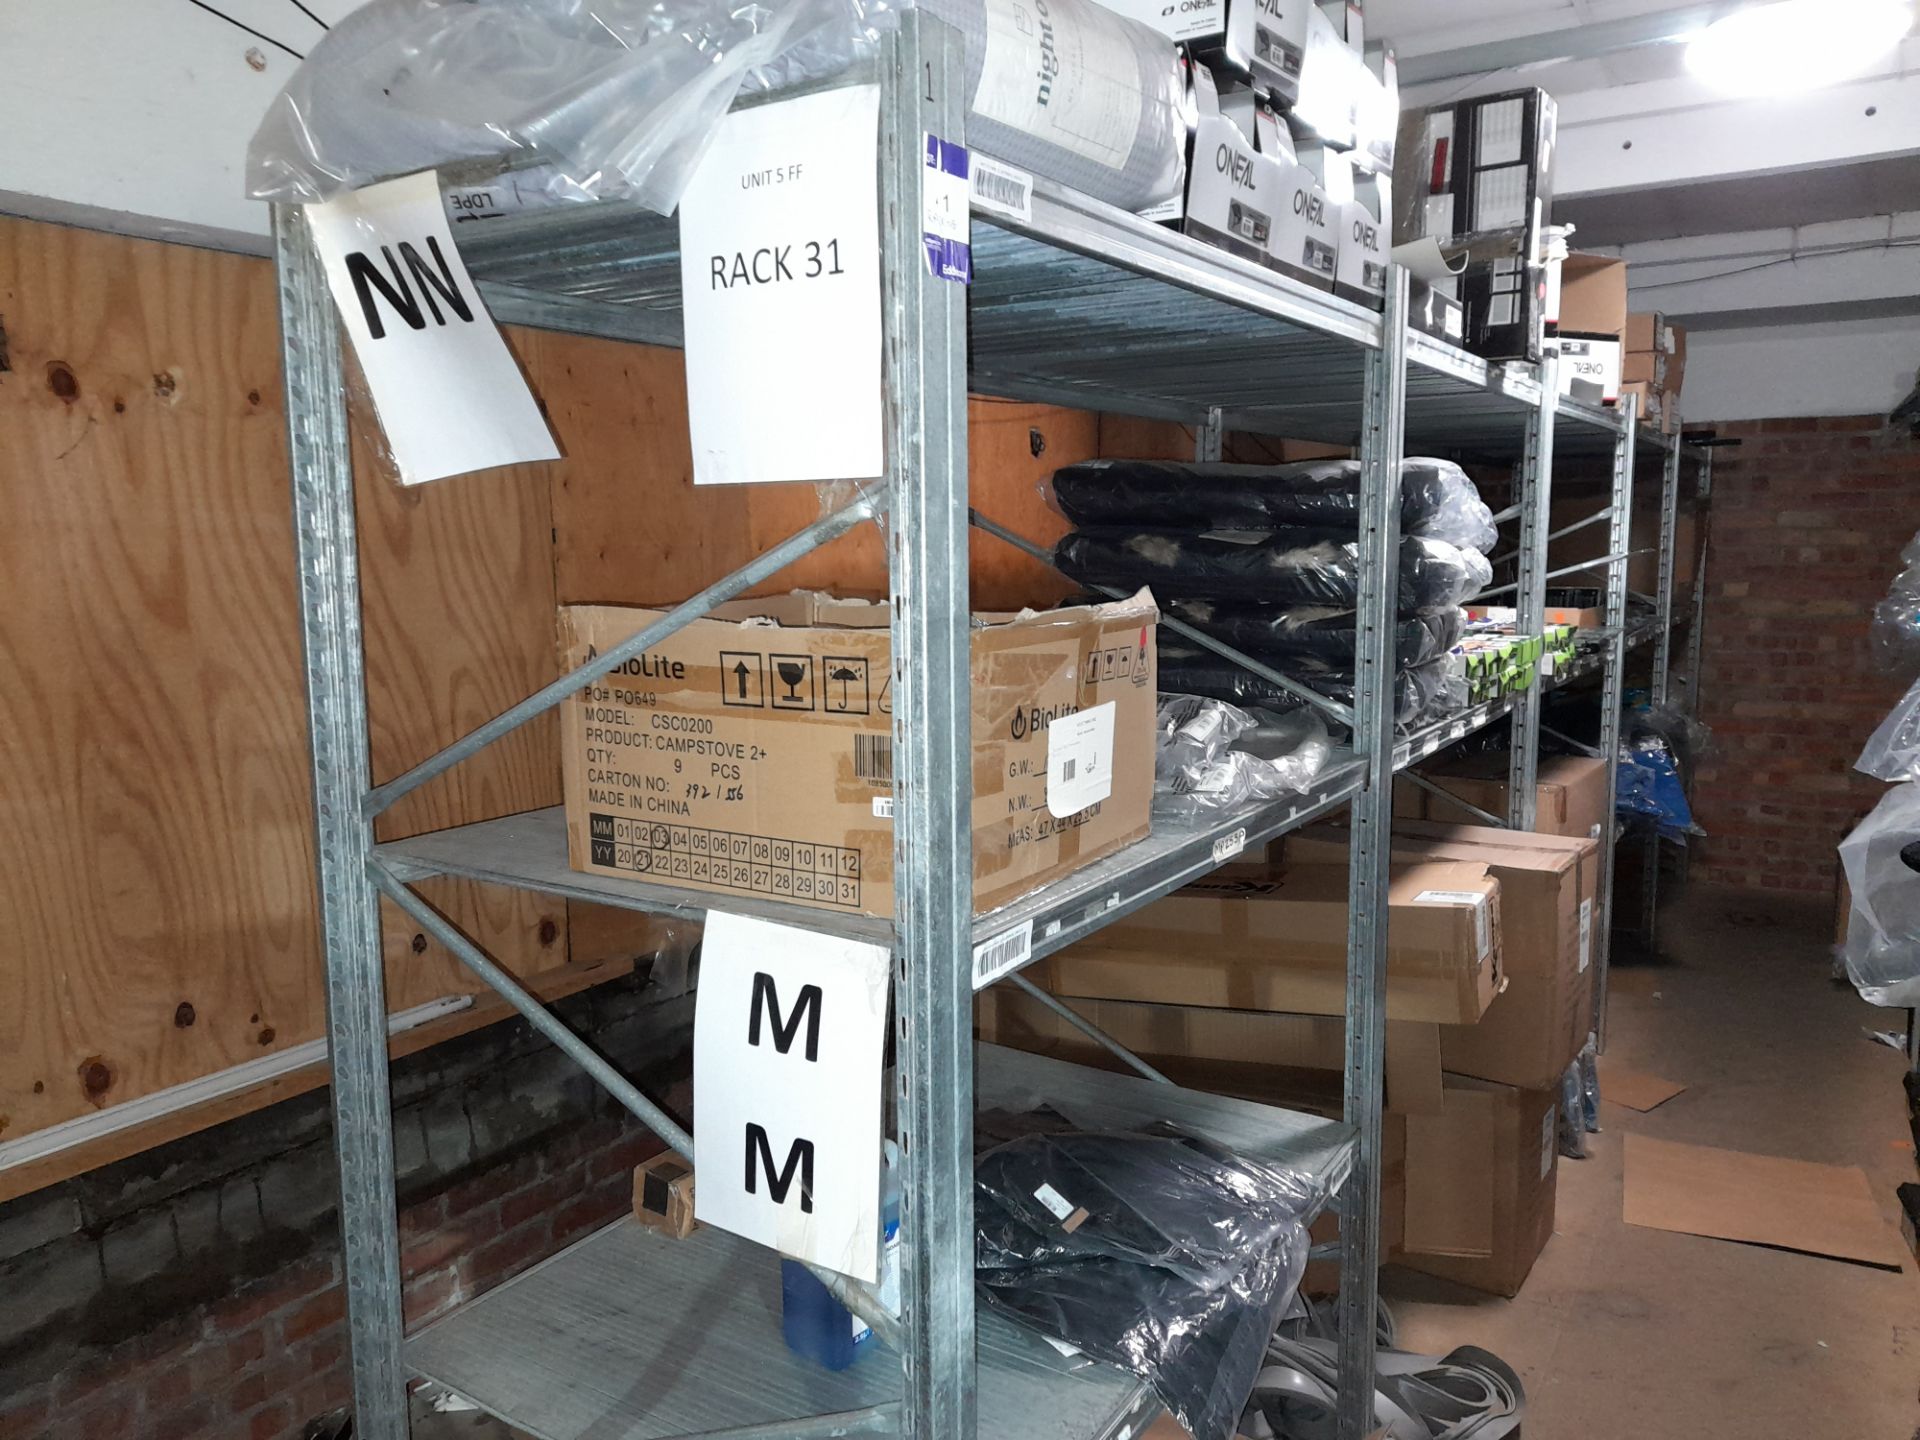 5 x Bays of Metal Shelving, located to Mezzanine (Approx. 1225W x 2000H x 800D) (Contents not